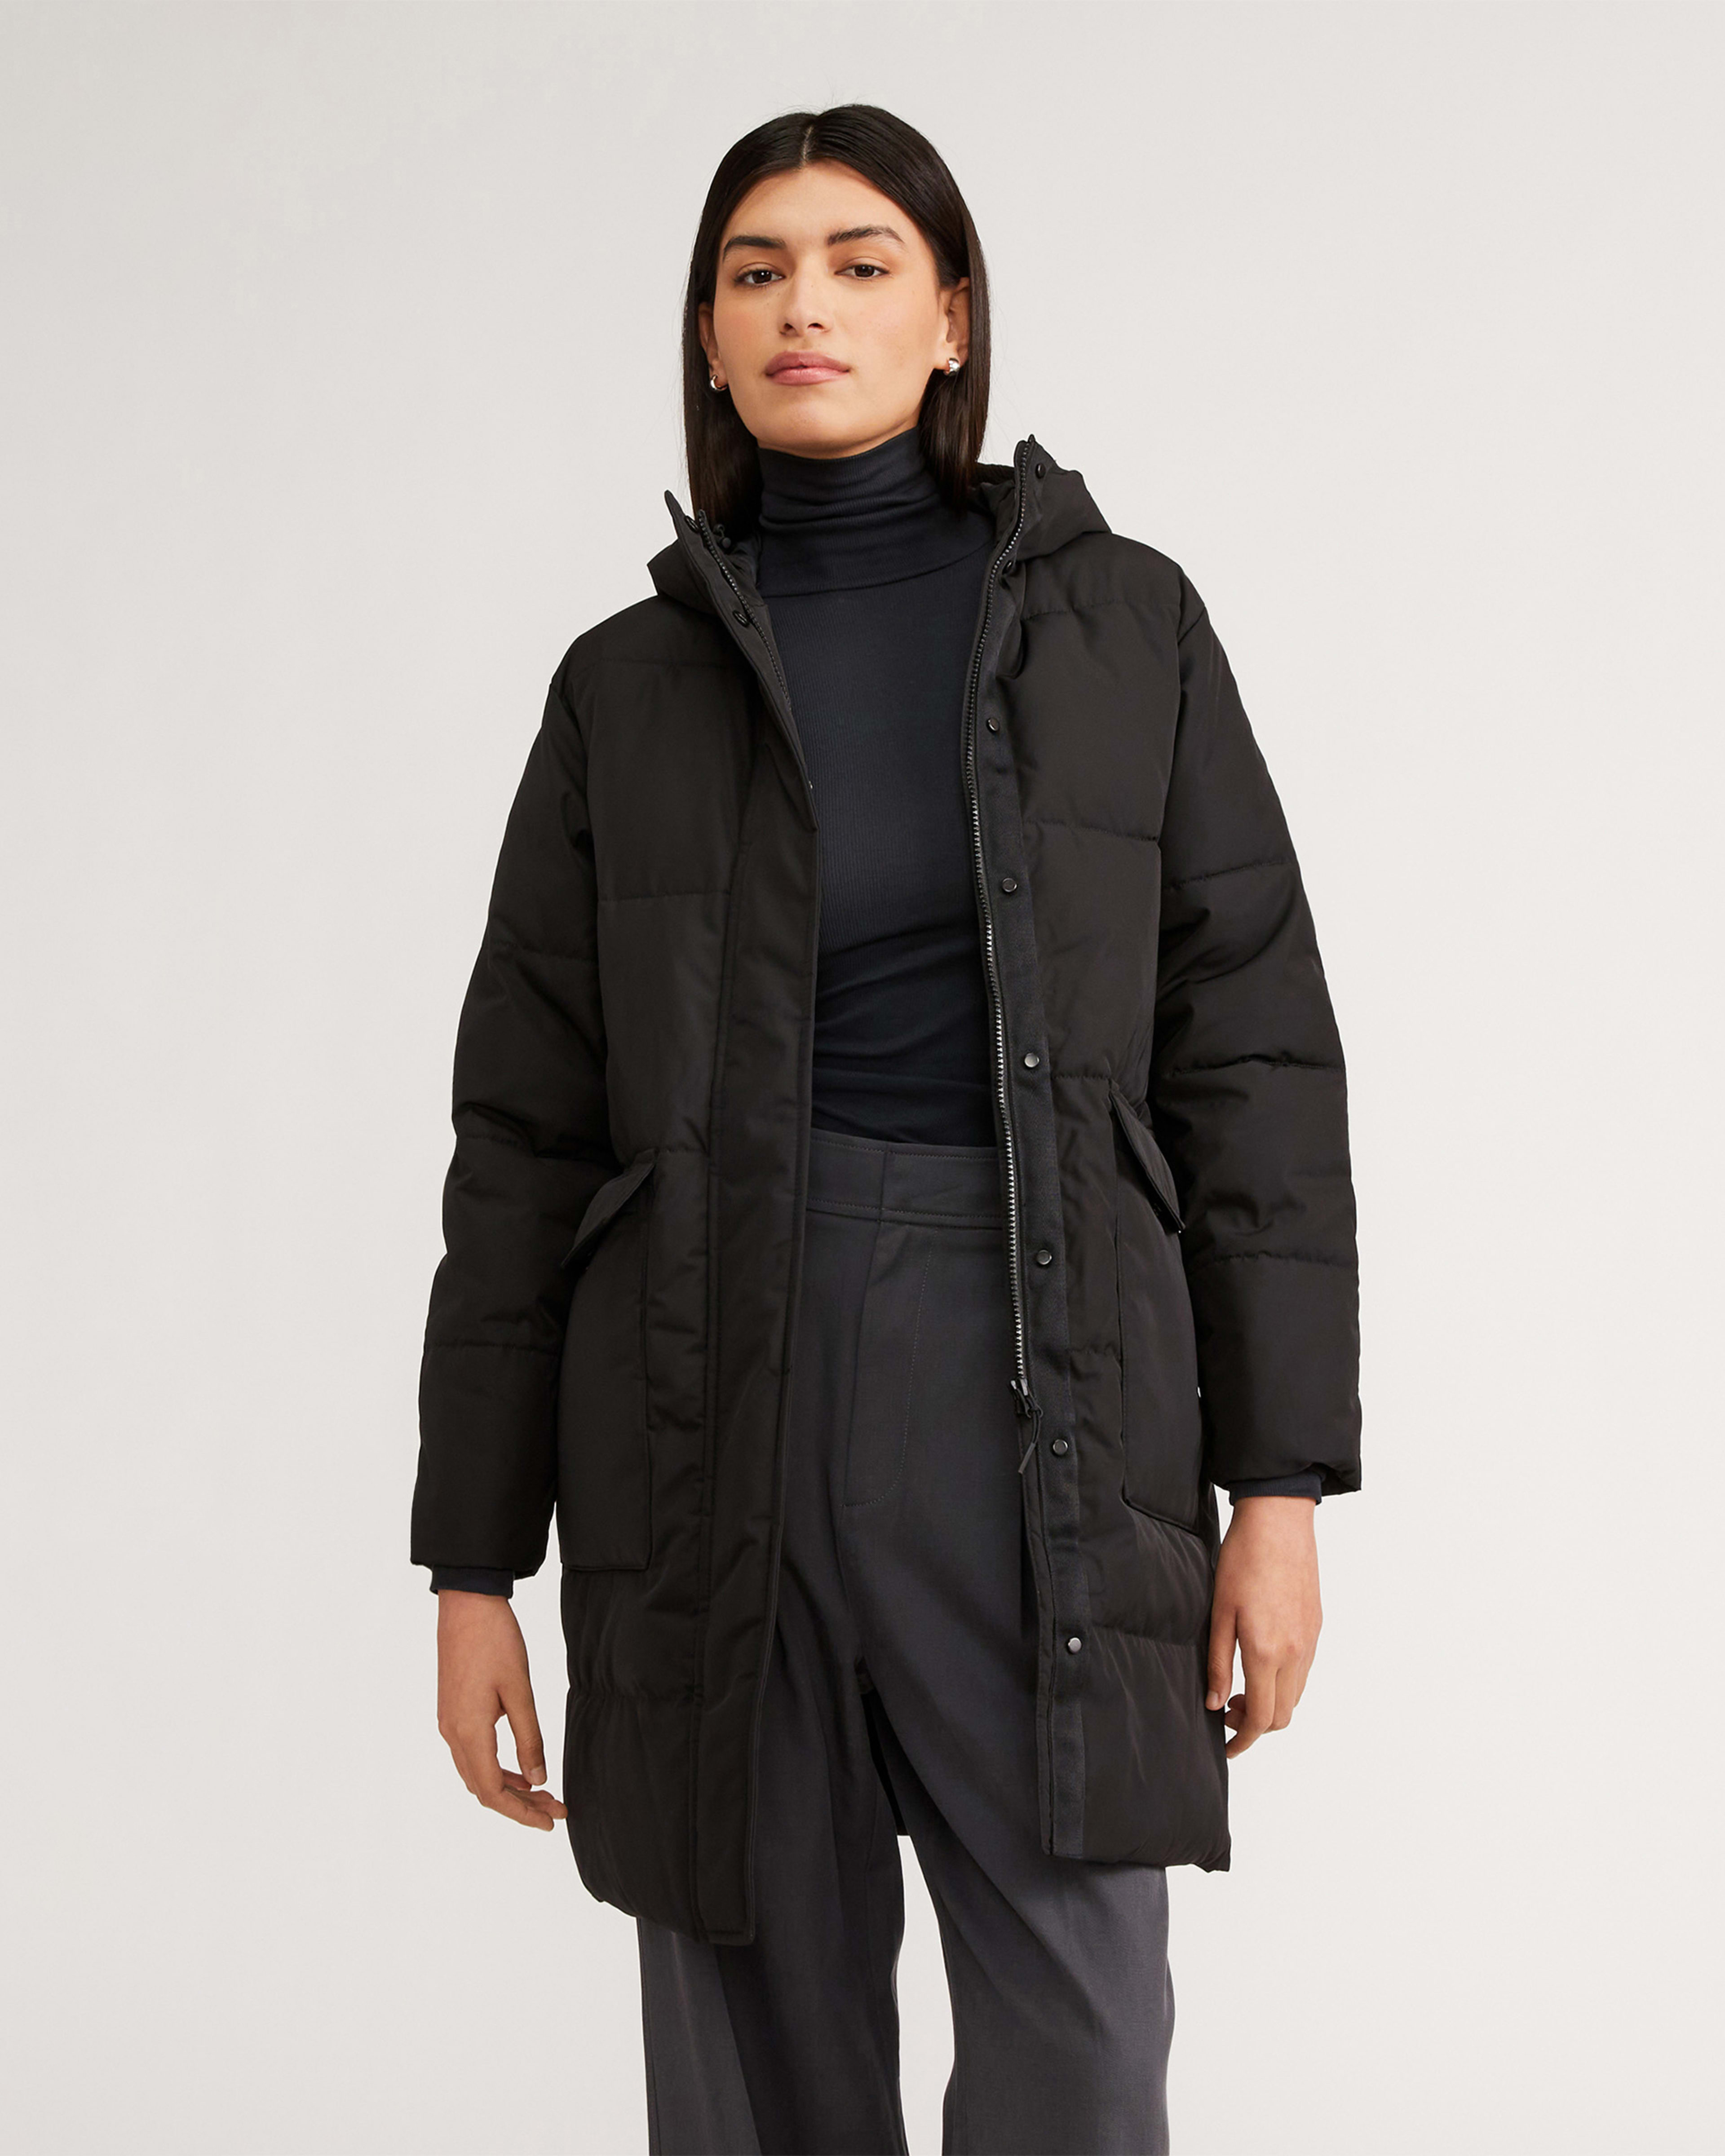 Everlane's New Puffers, Parkas and Pullovers Are Made From Plastic? -  FASHION Magazine